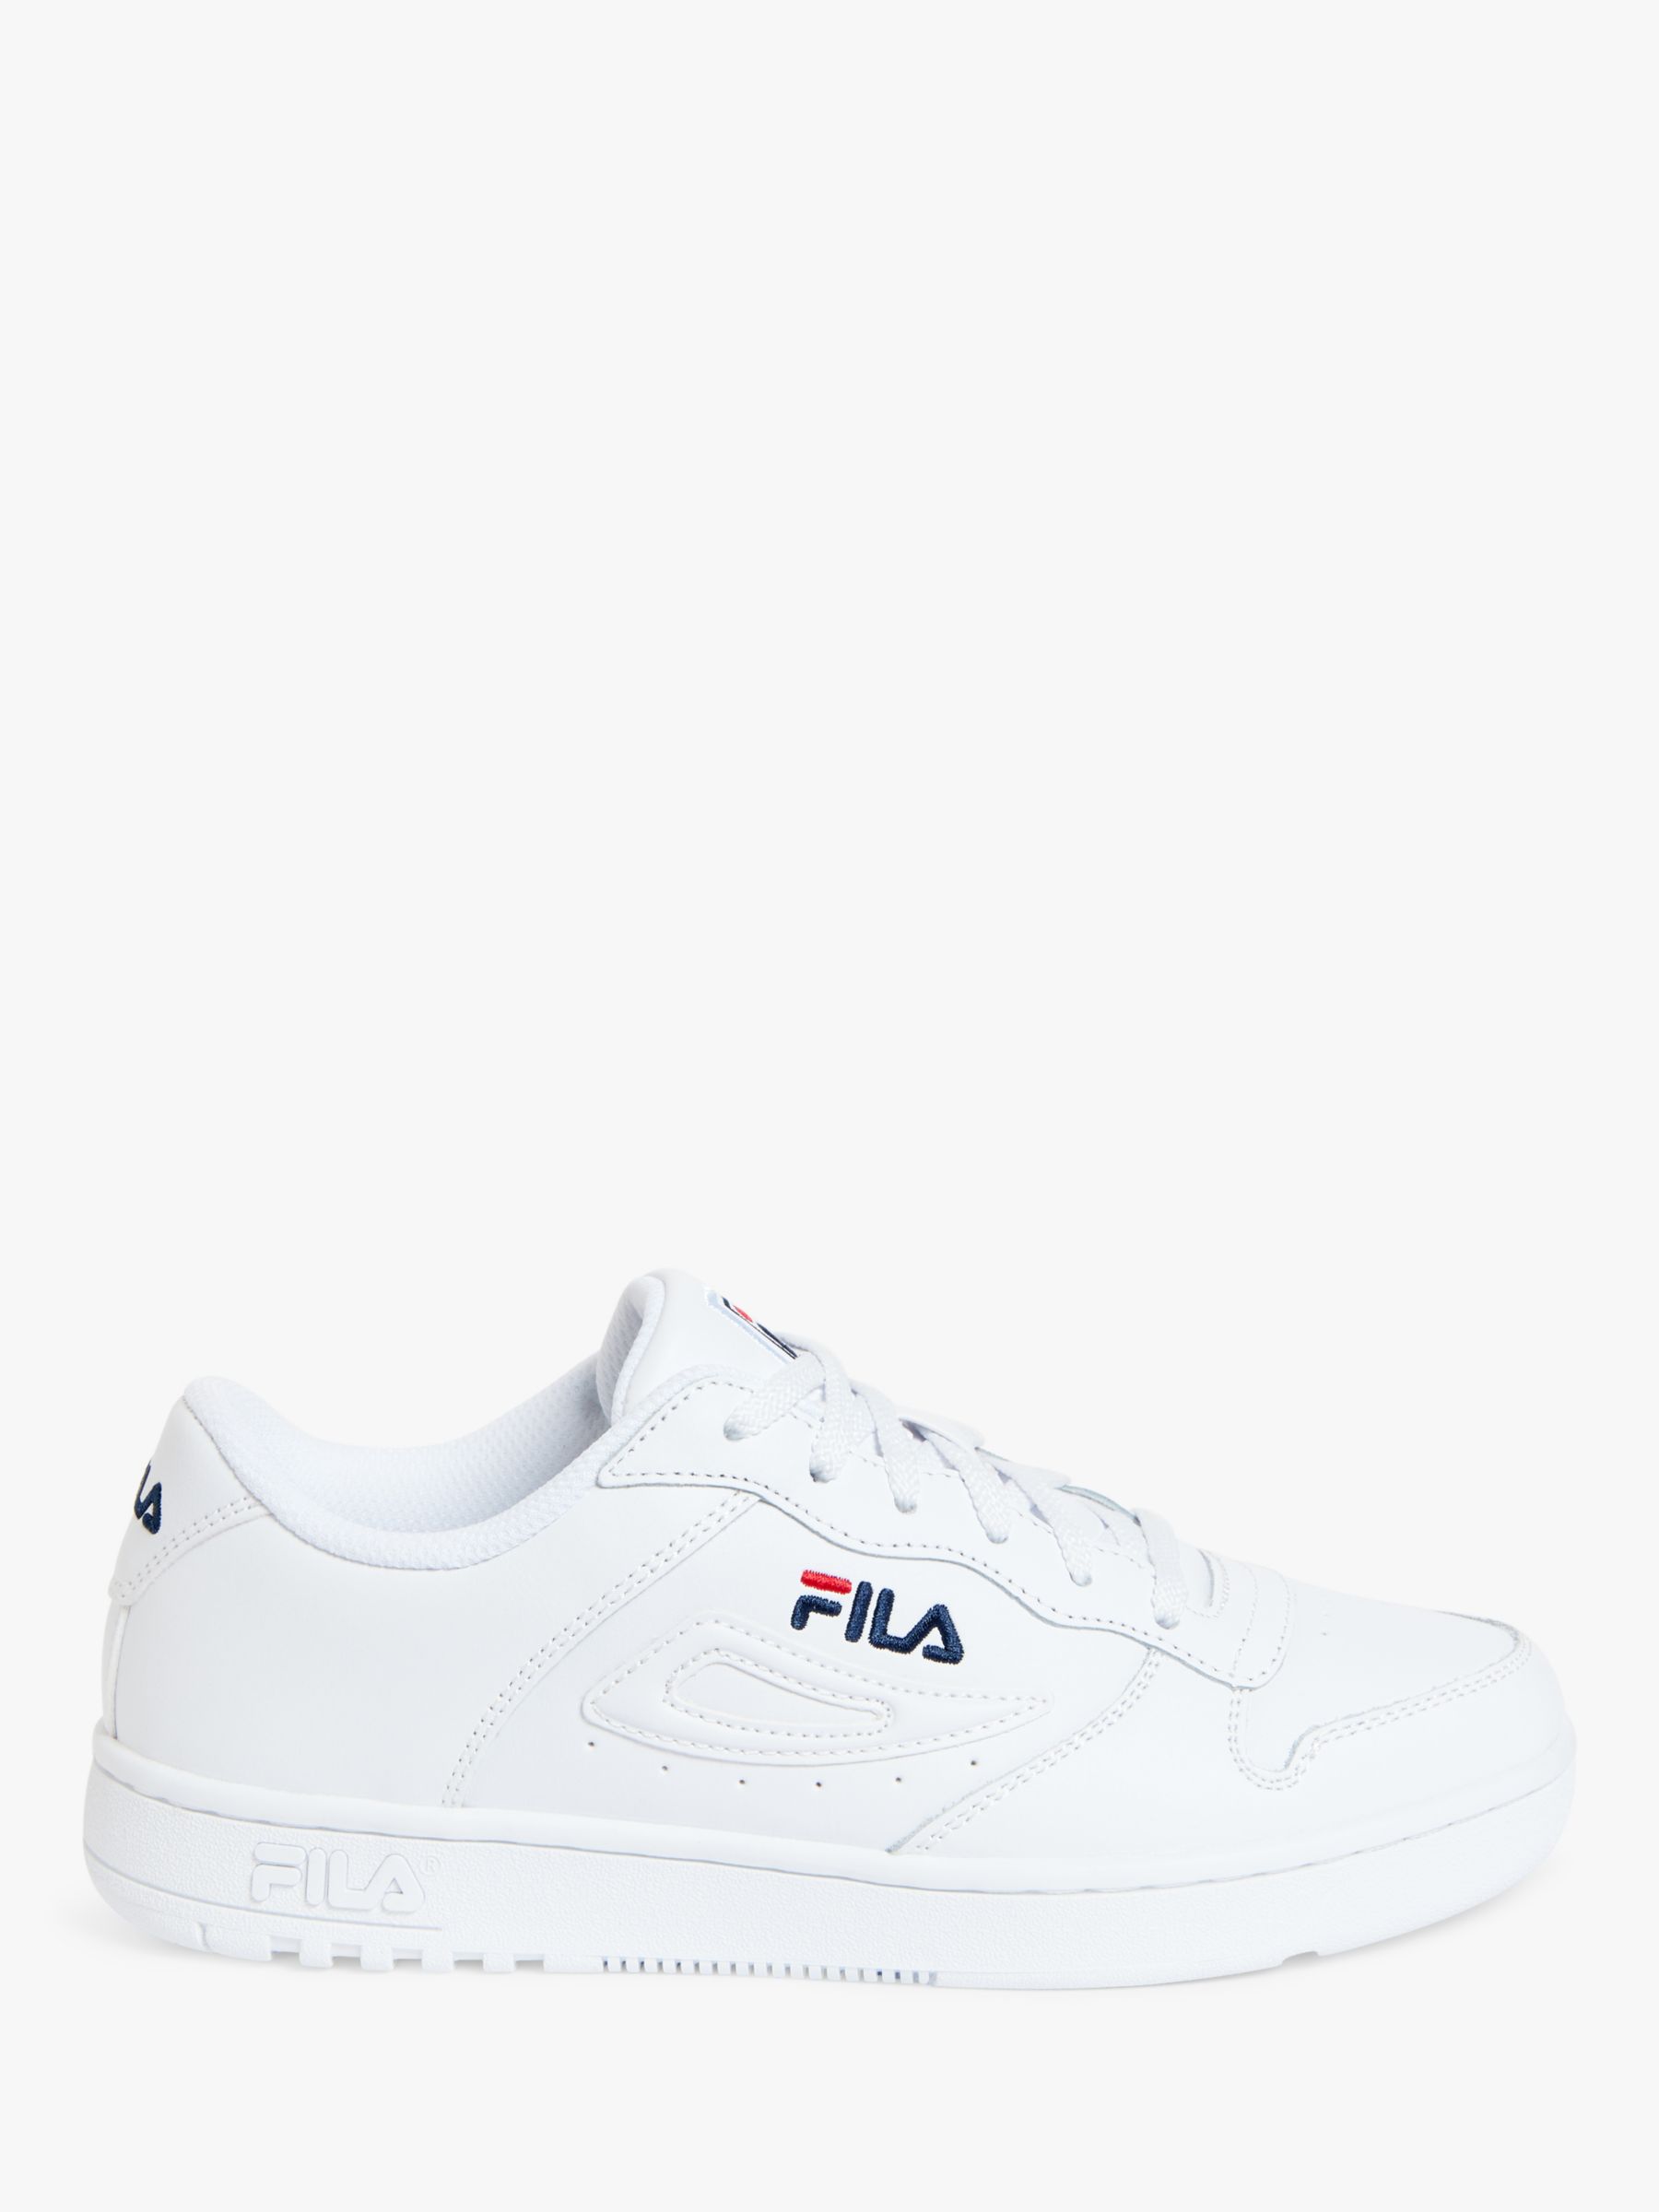 Fila FX-100 DSX Low Top Trainers, White